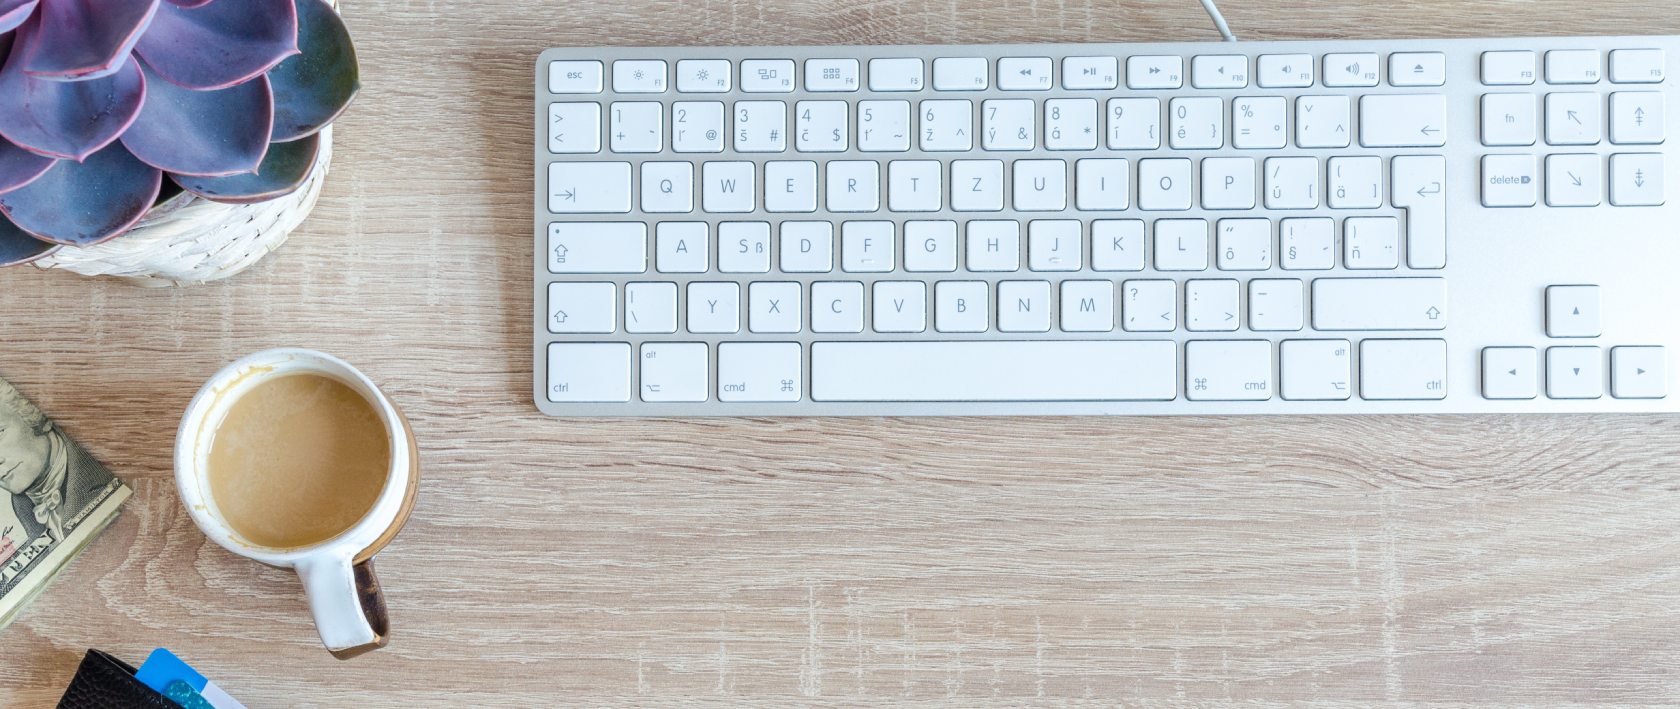 keyboard-to-type-your-resume-on